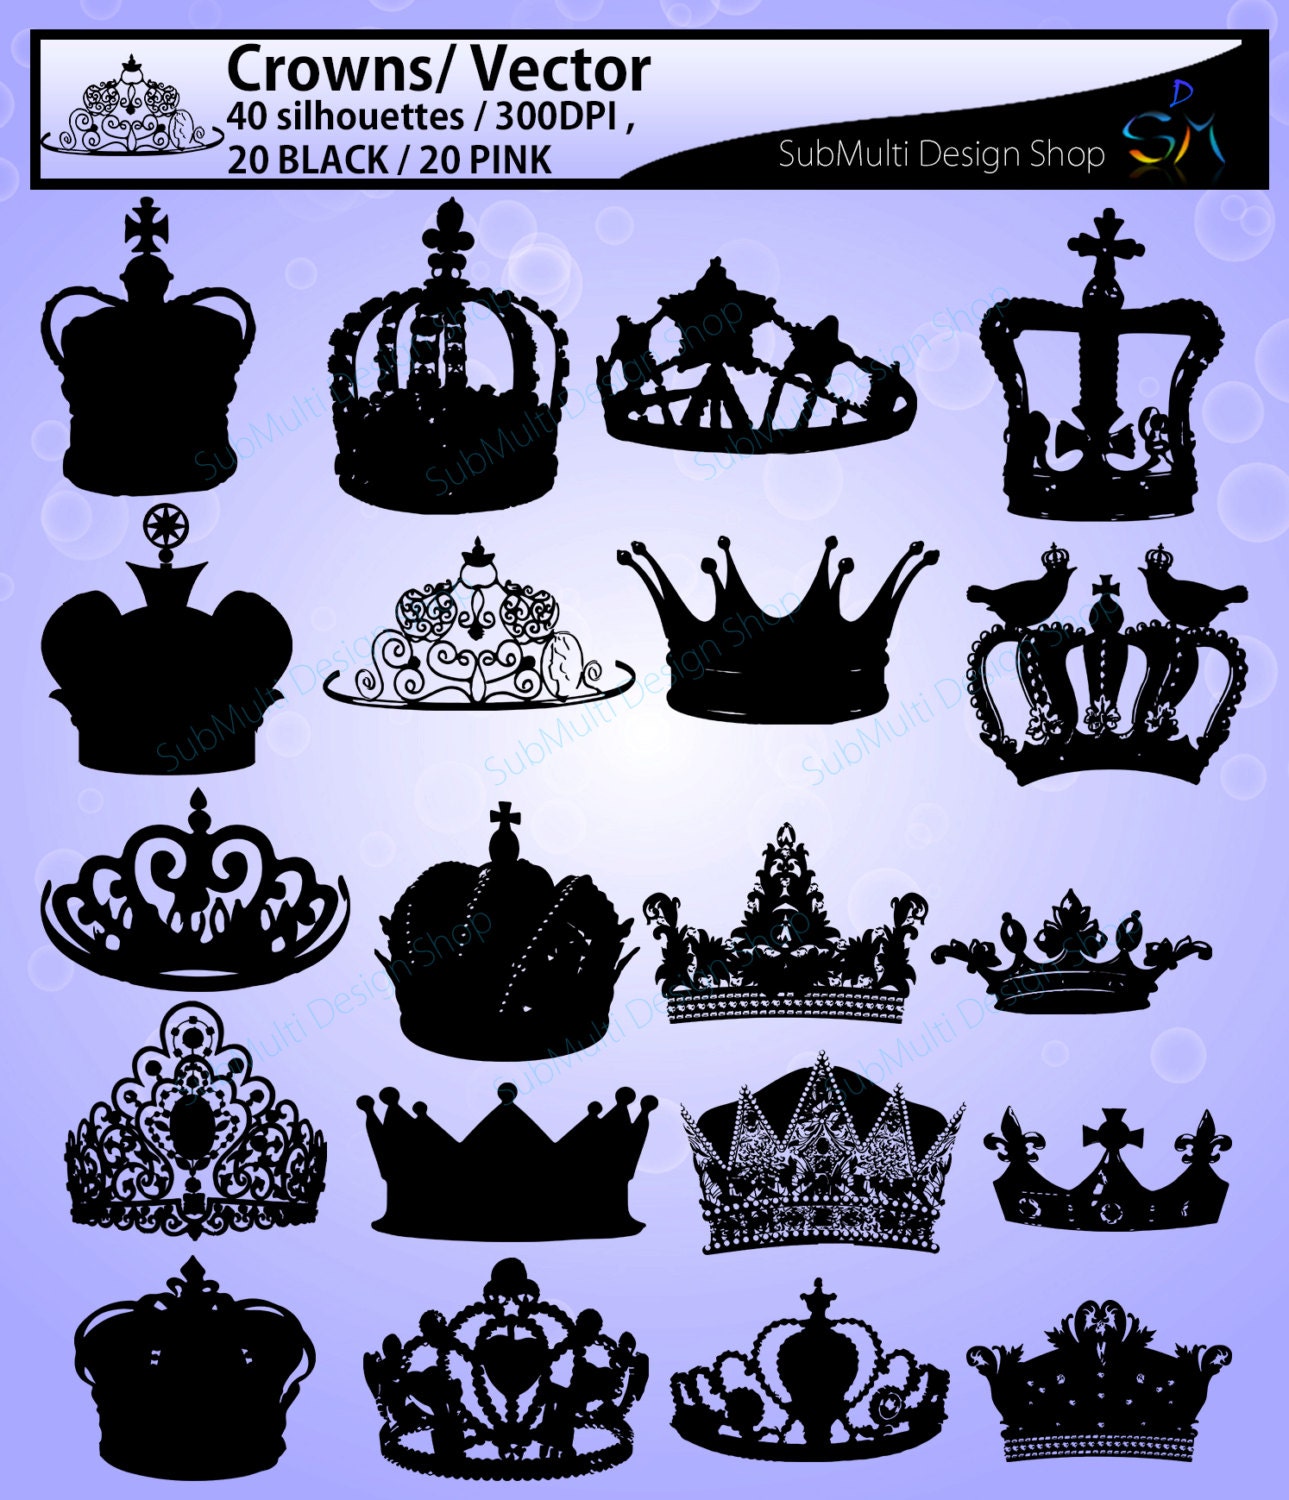 Download 20Black 20Pink crown / crowns silhouette / High Quality